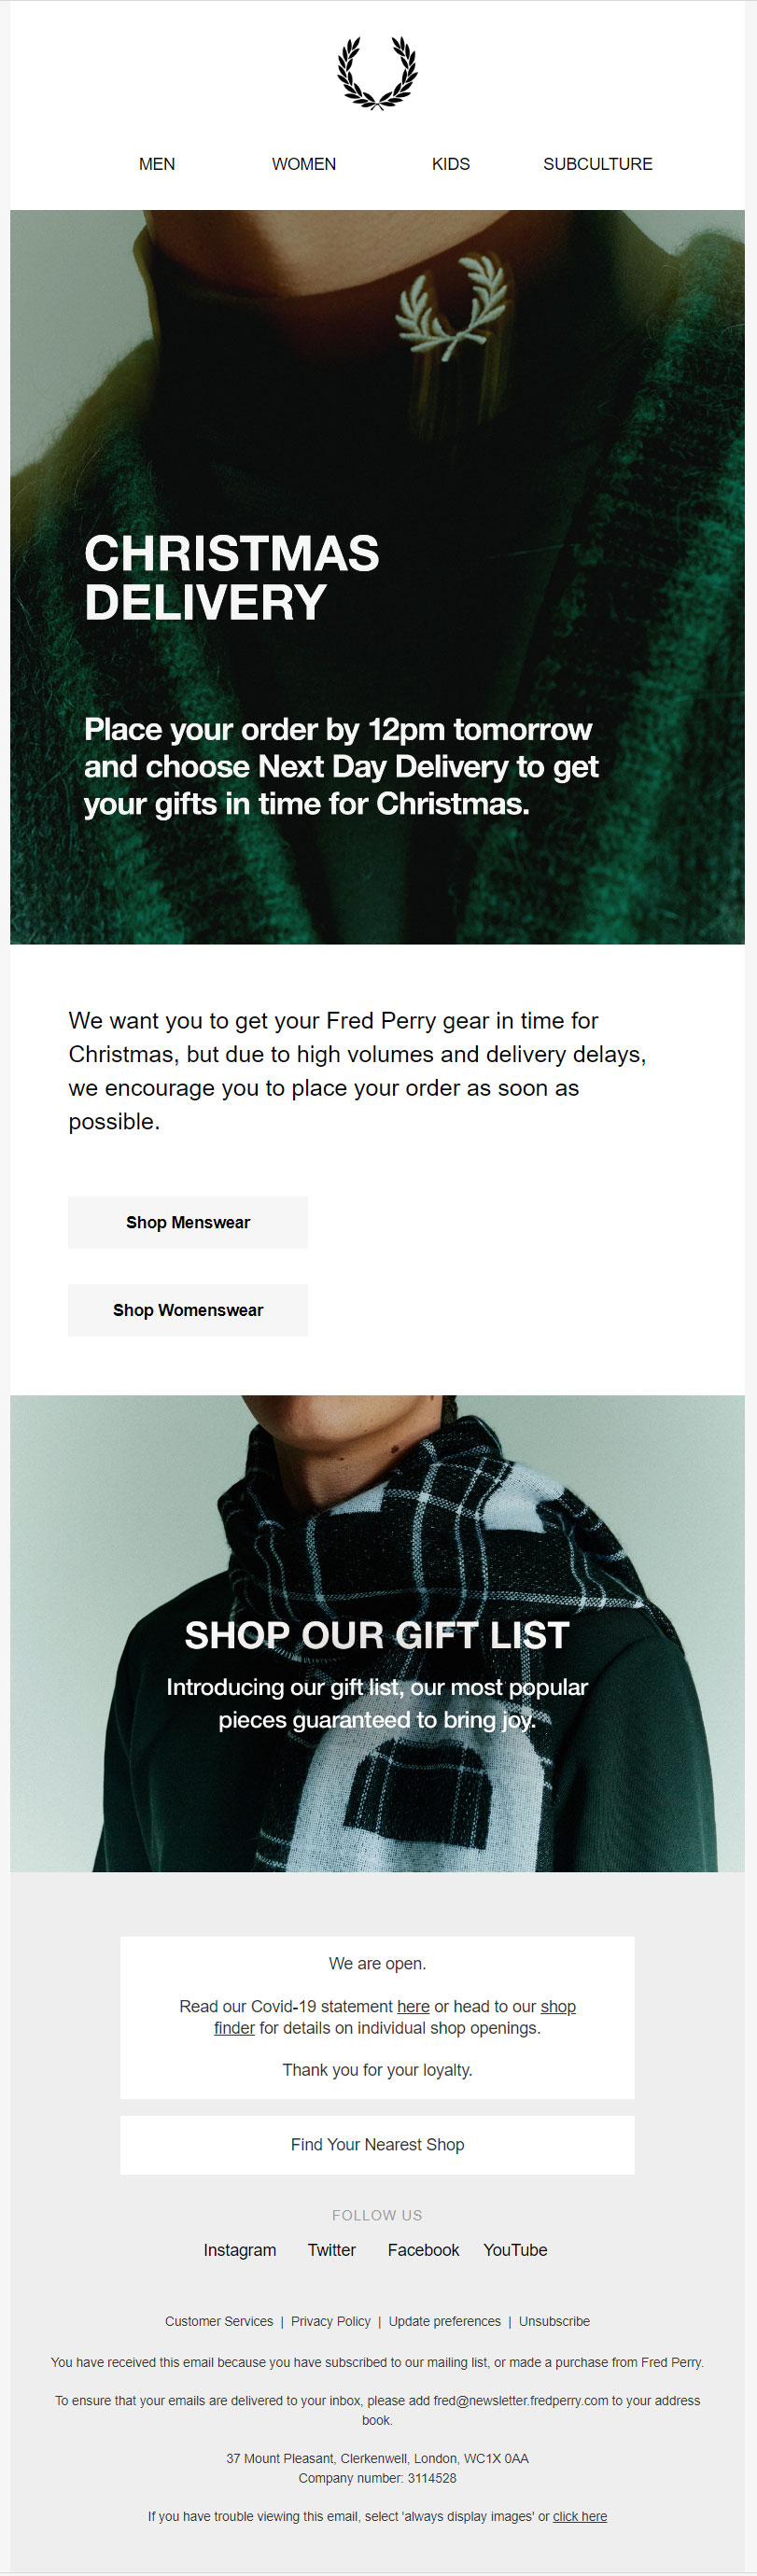 Christmas email- Fredperry